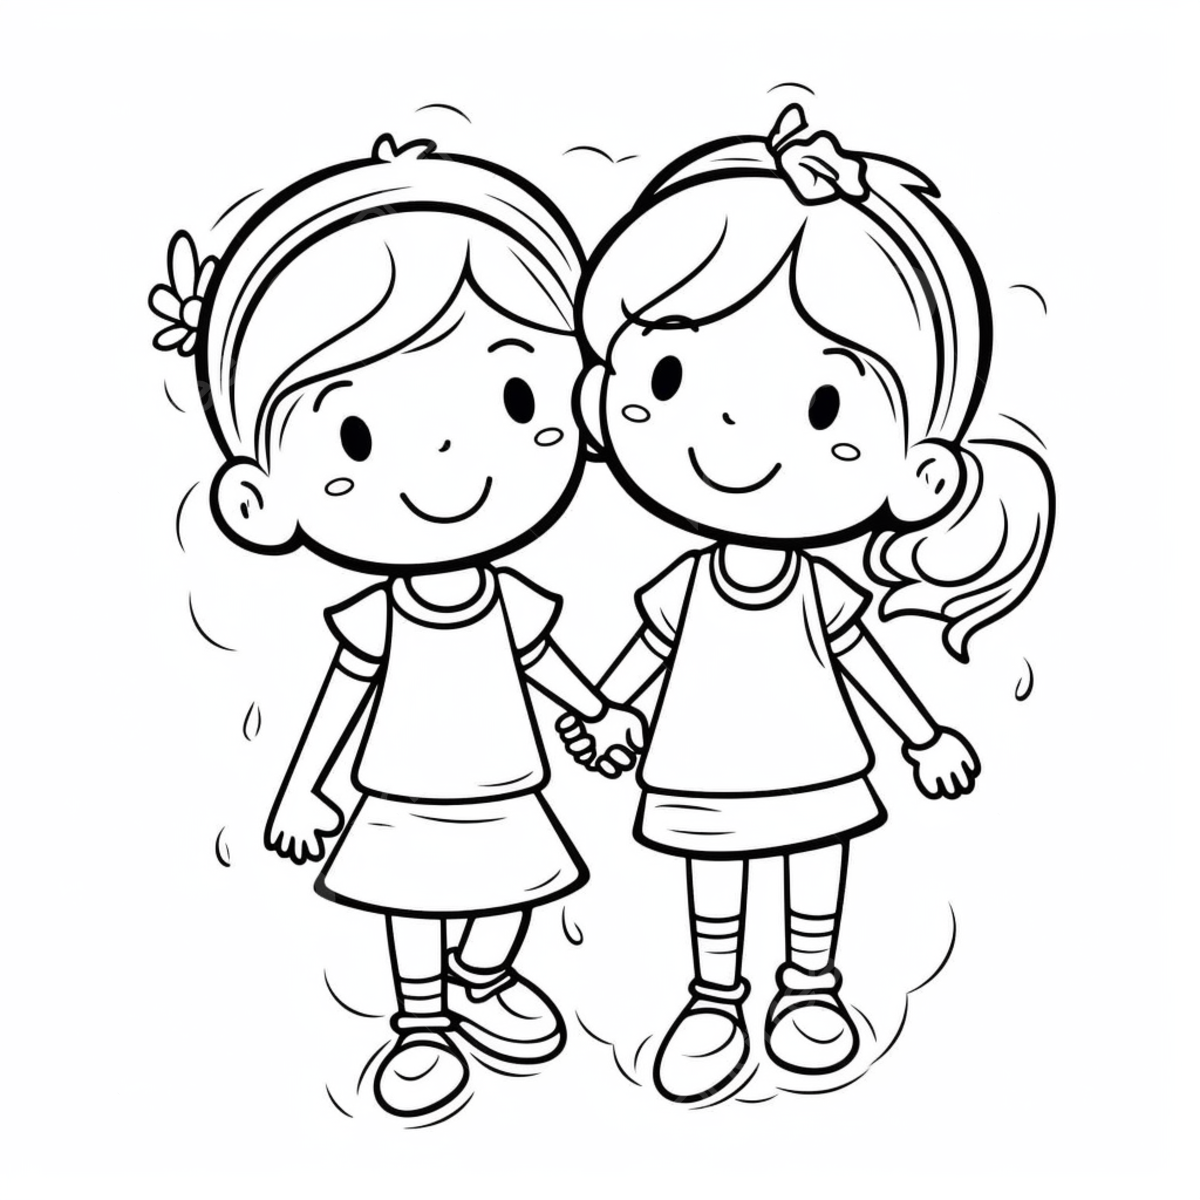 Little friends coloring pages friends drawing ring drawing friend drawing png transparent image and clipart for free download